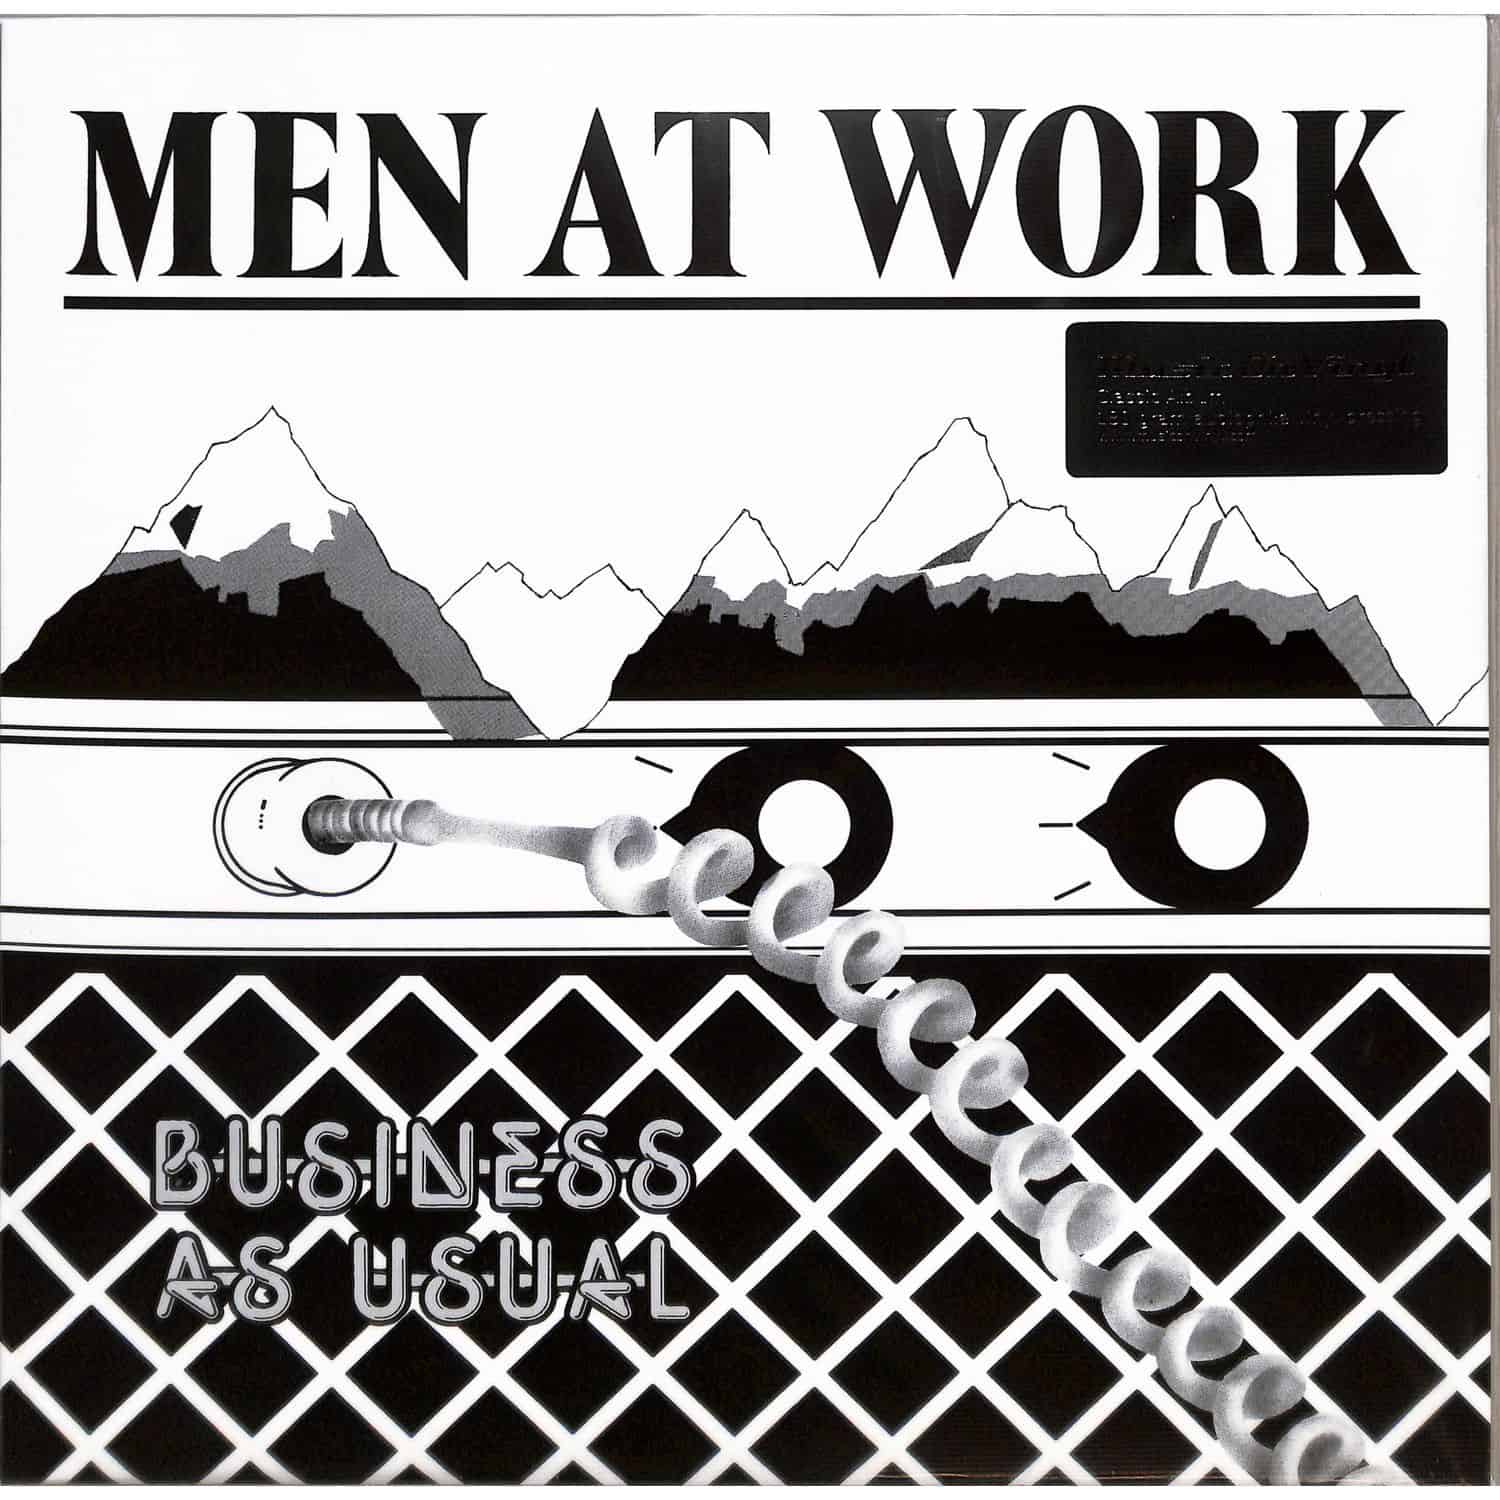 Men At Work - BUSINESS AS USUAL 